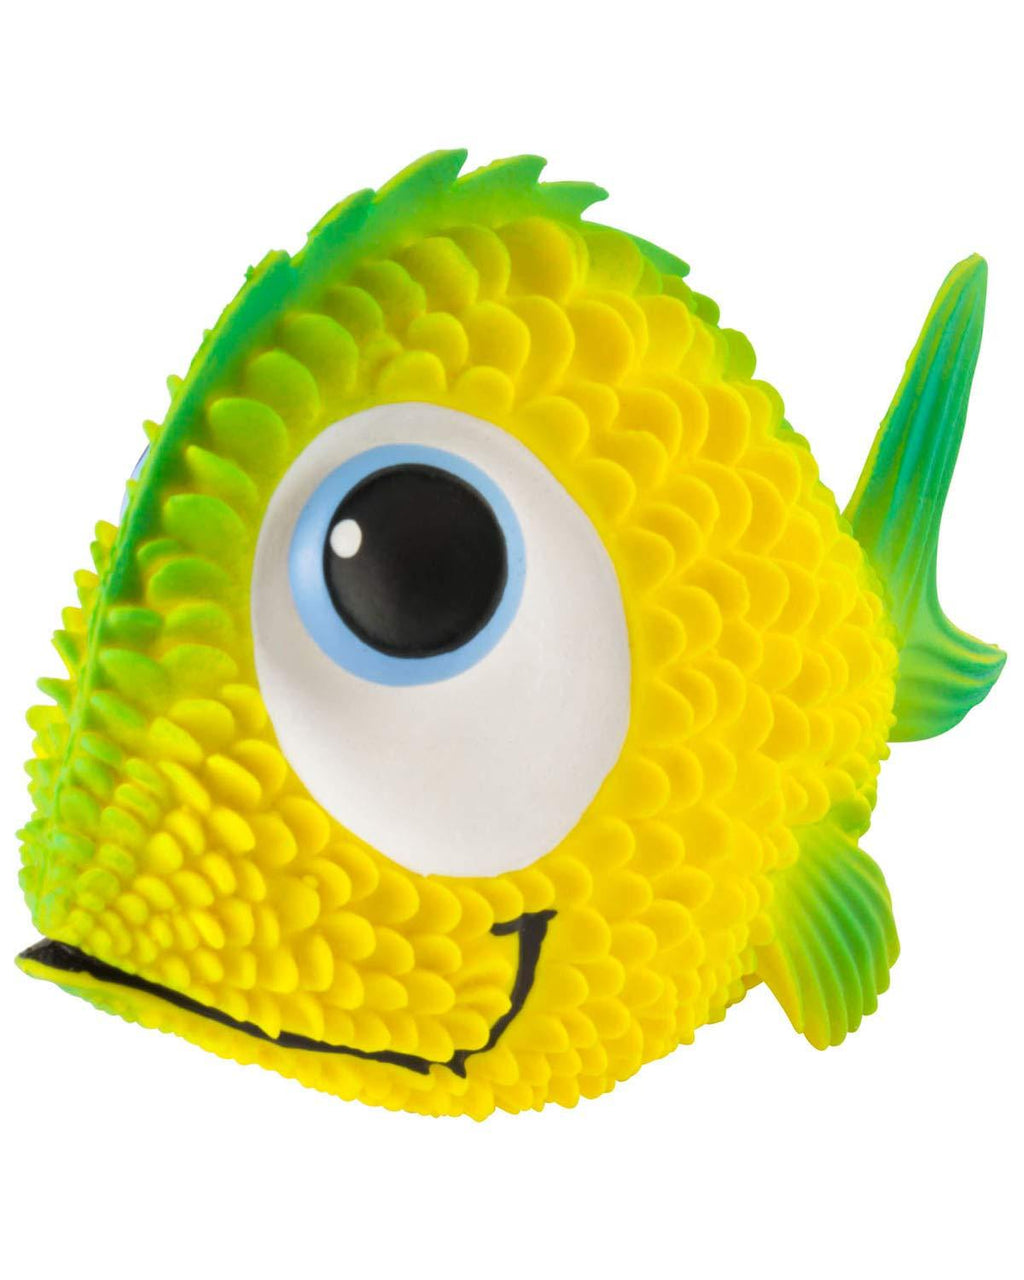 [Australia] - Sensory Fish - Squeaky Dog Toys - Soft, Natural Rubber (Latex) - for Puppies, Small Dogs, Medium Dogs, Blind Dogs - Indoor Play - Complies with Same Safety Standards as Children's Toys 